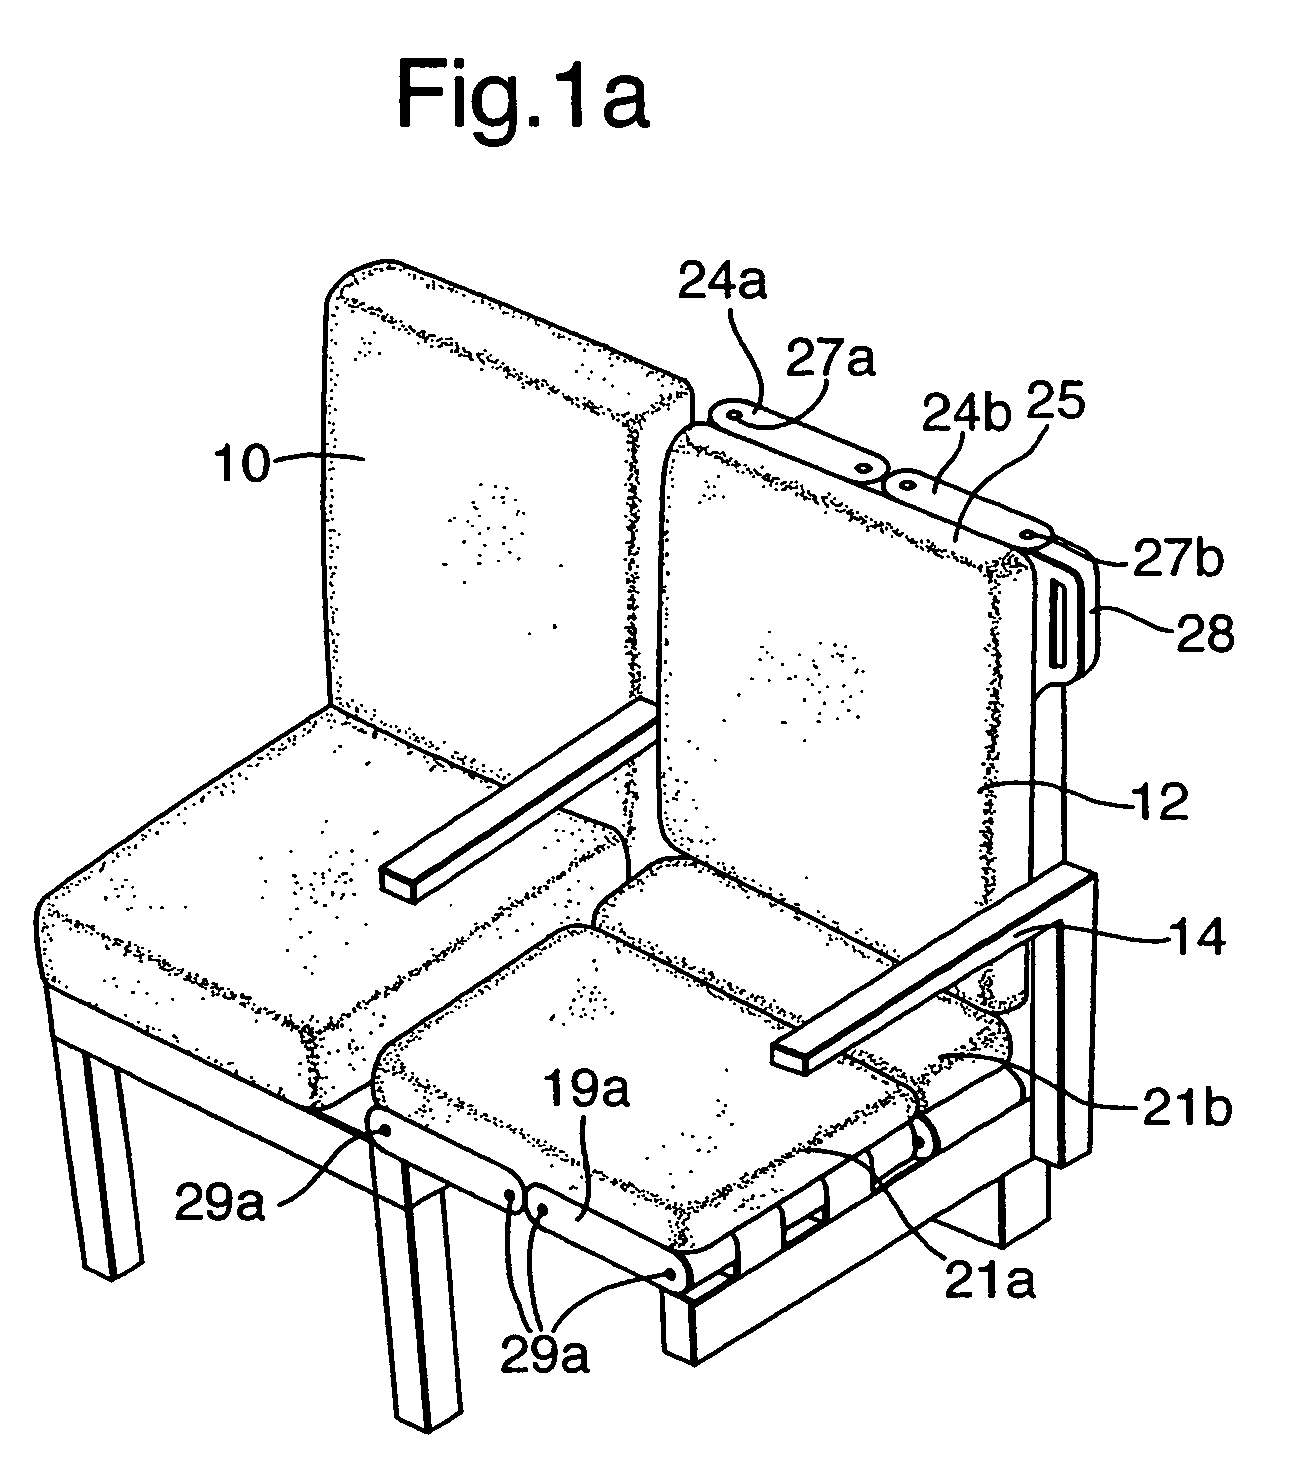 Aircraft seat assembly